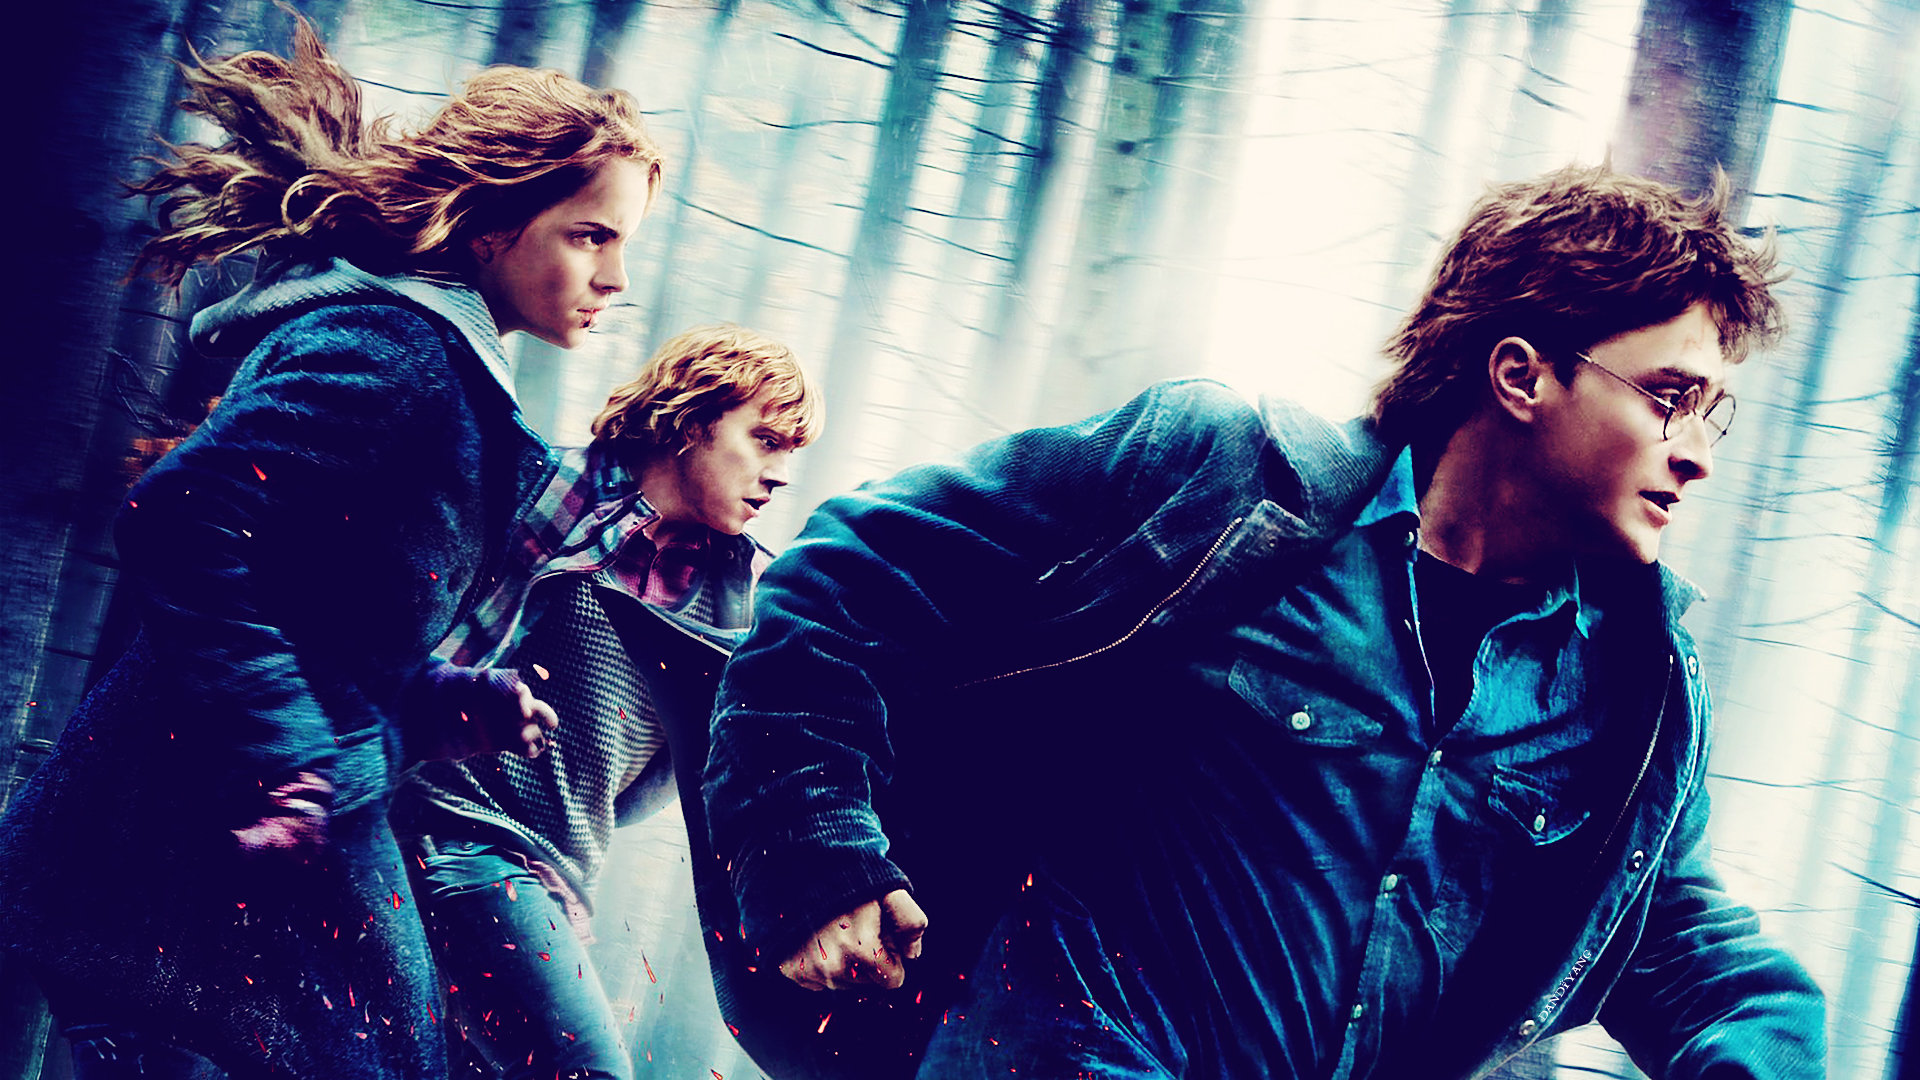 Download Full Hd Harry Potter And The Deathly Hallows - Harry Potter And The Deathly Hallows Running - HD Wallpaper 